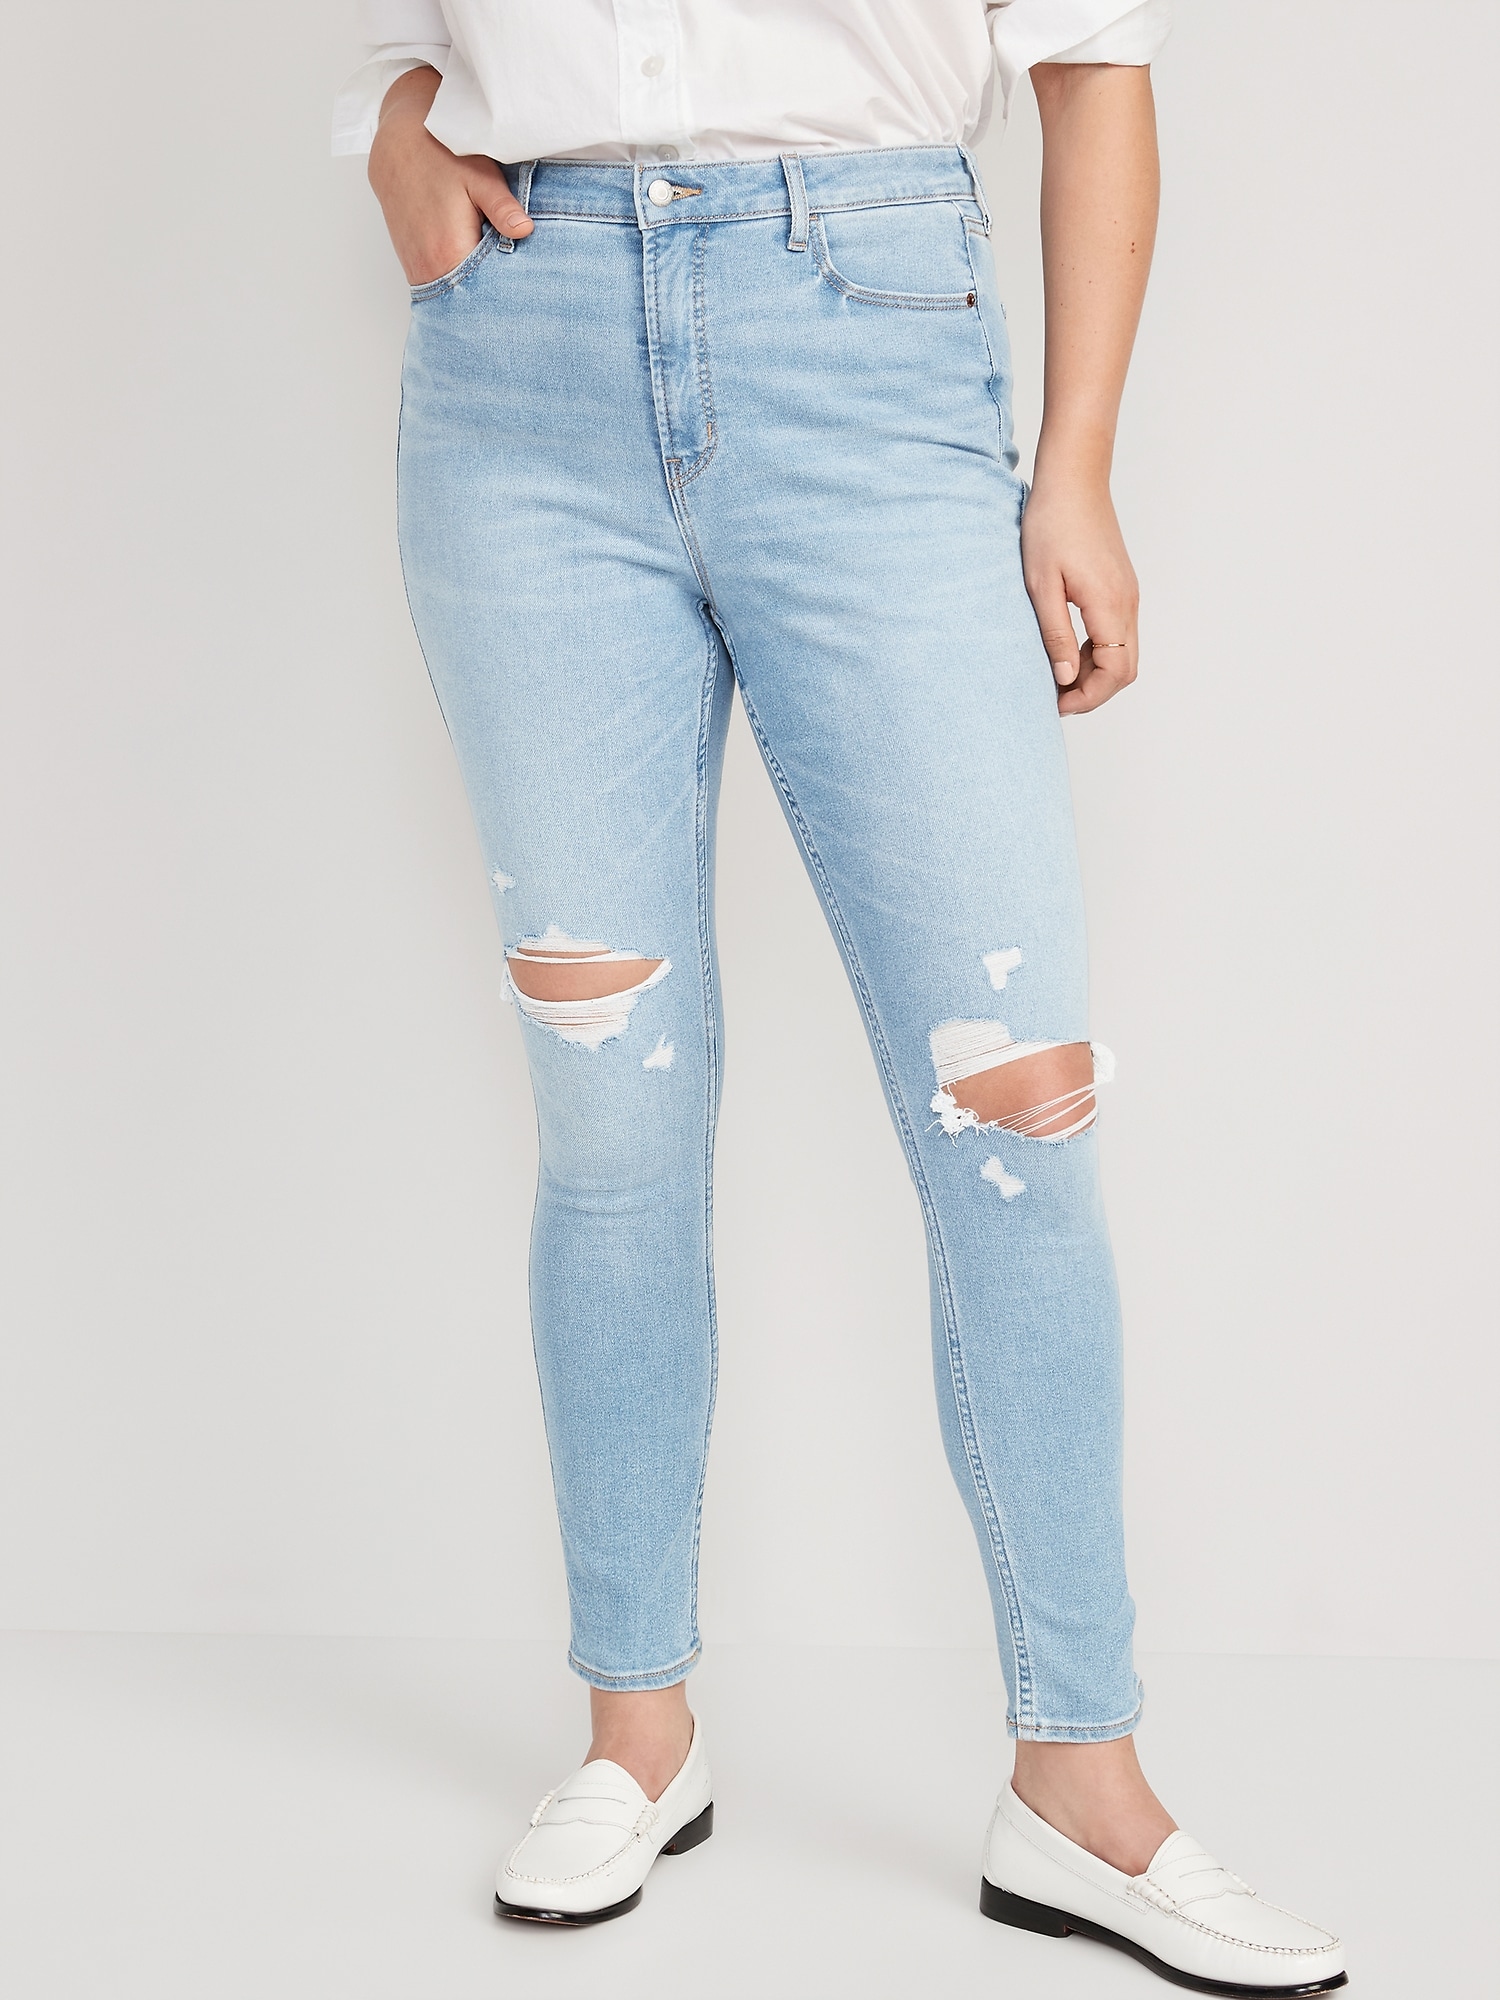 Extra Rockstar | Women Stretch 360° Super-Skinny High-Waisted Jeans for Old Navy